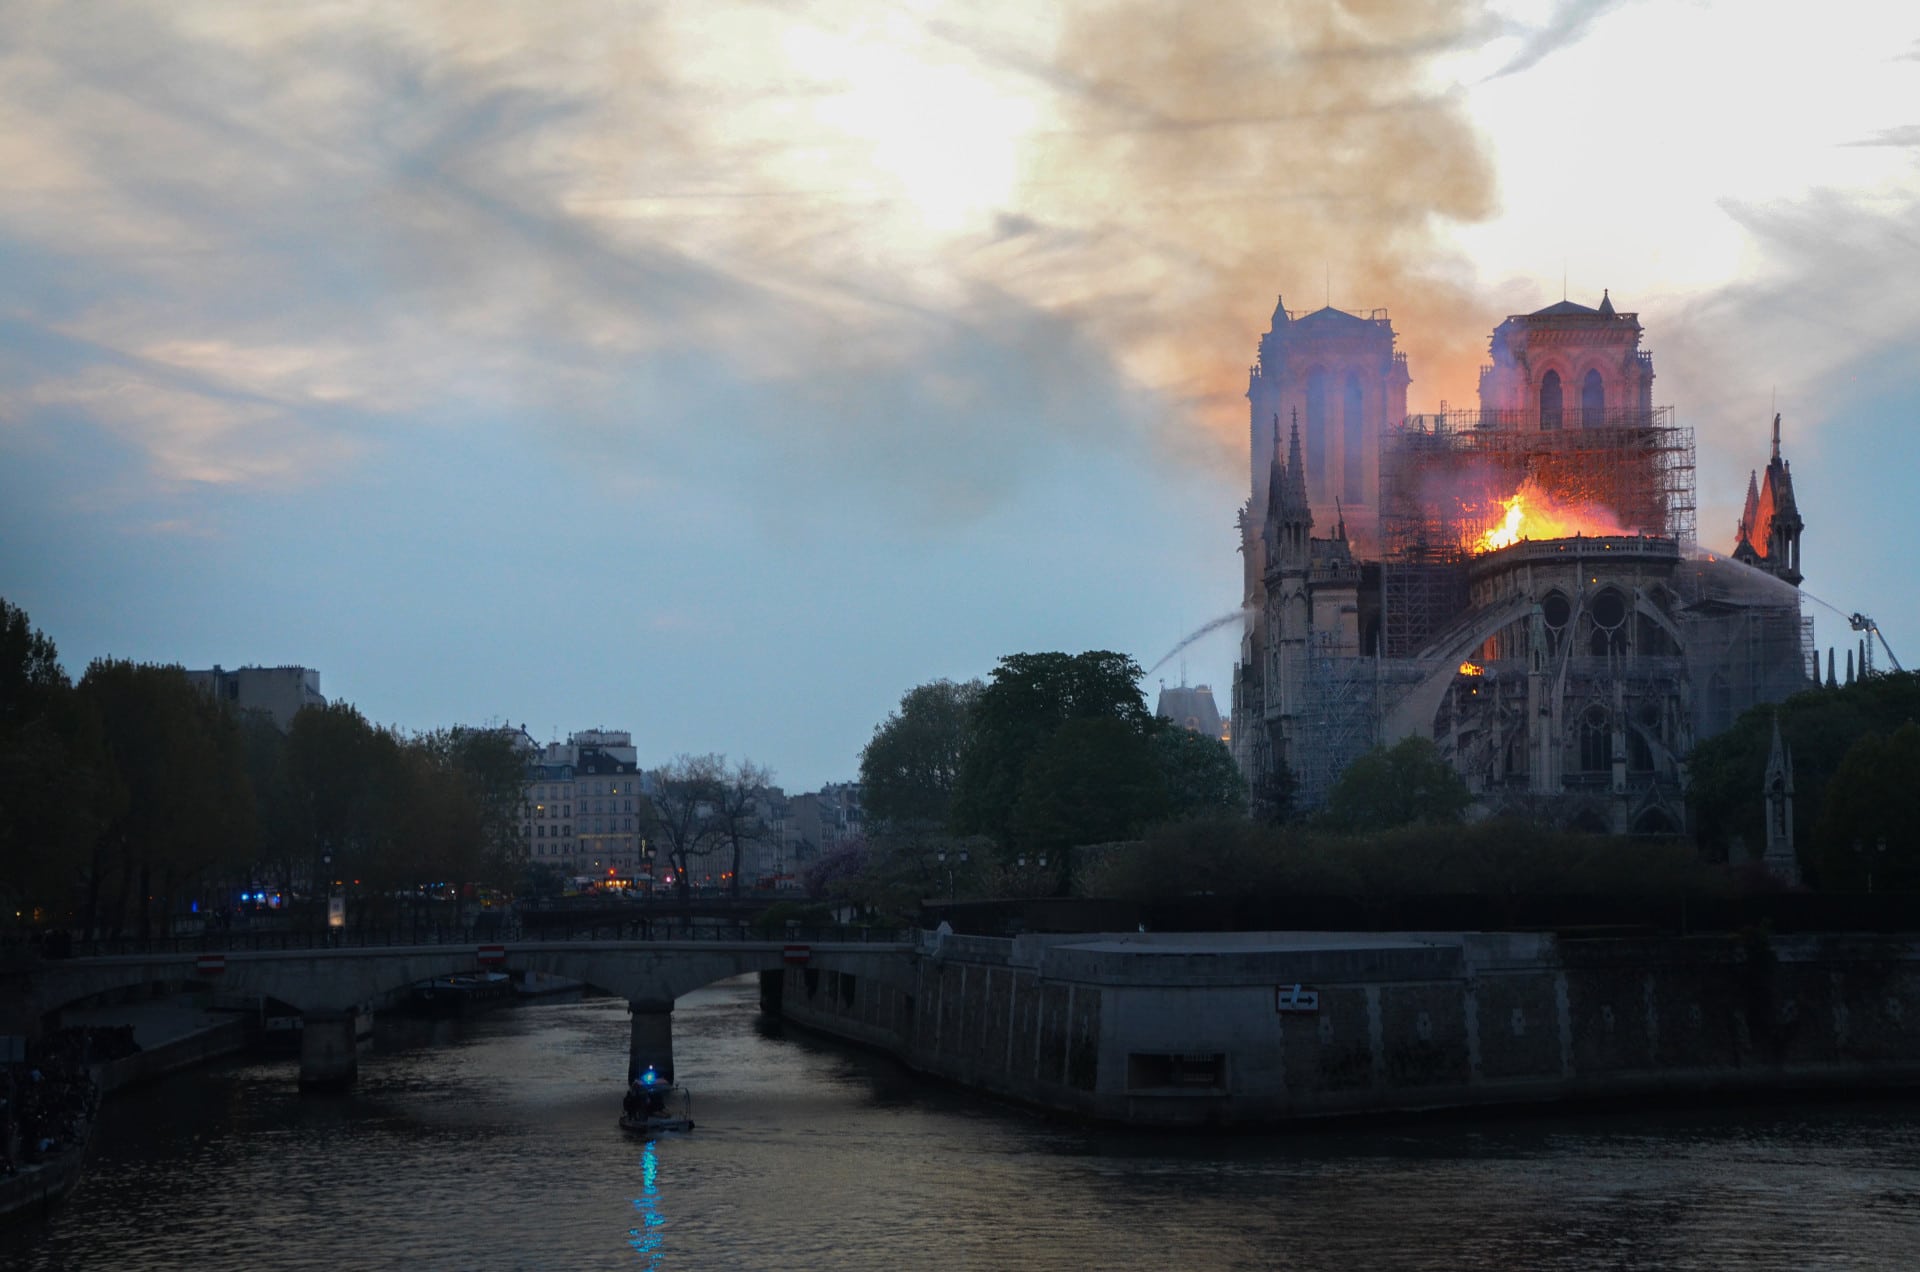 On April 15, 2019, the world watched in horror as Notre-Dame Cathedral burned. Friends of Notre-Dame de Paris is the official 501(c)(3) charity leading the international fundraising efforts to rebuild and restore Notre-Dame Cathedral.